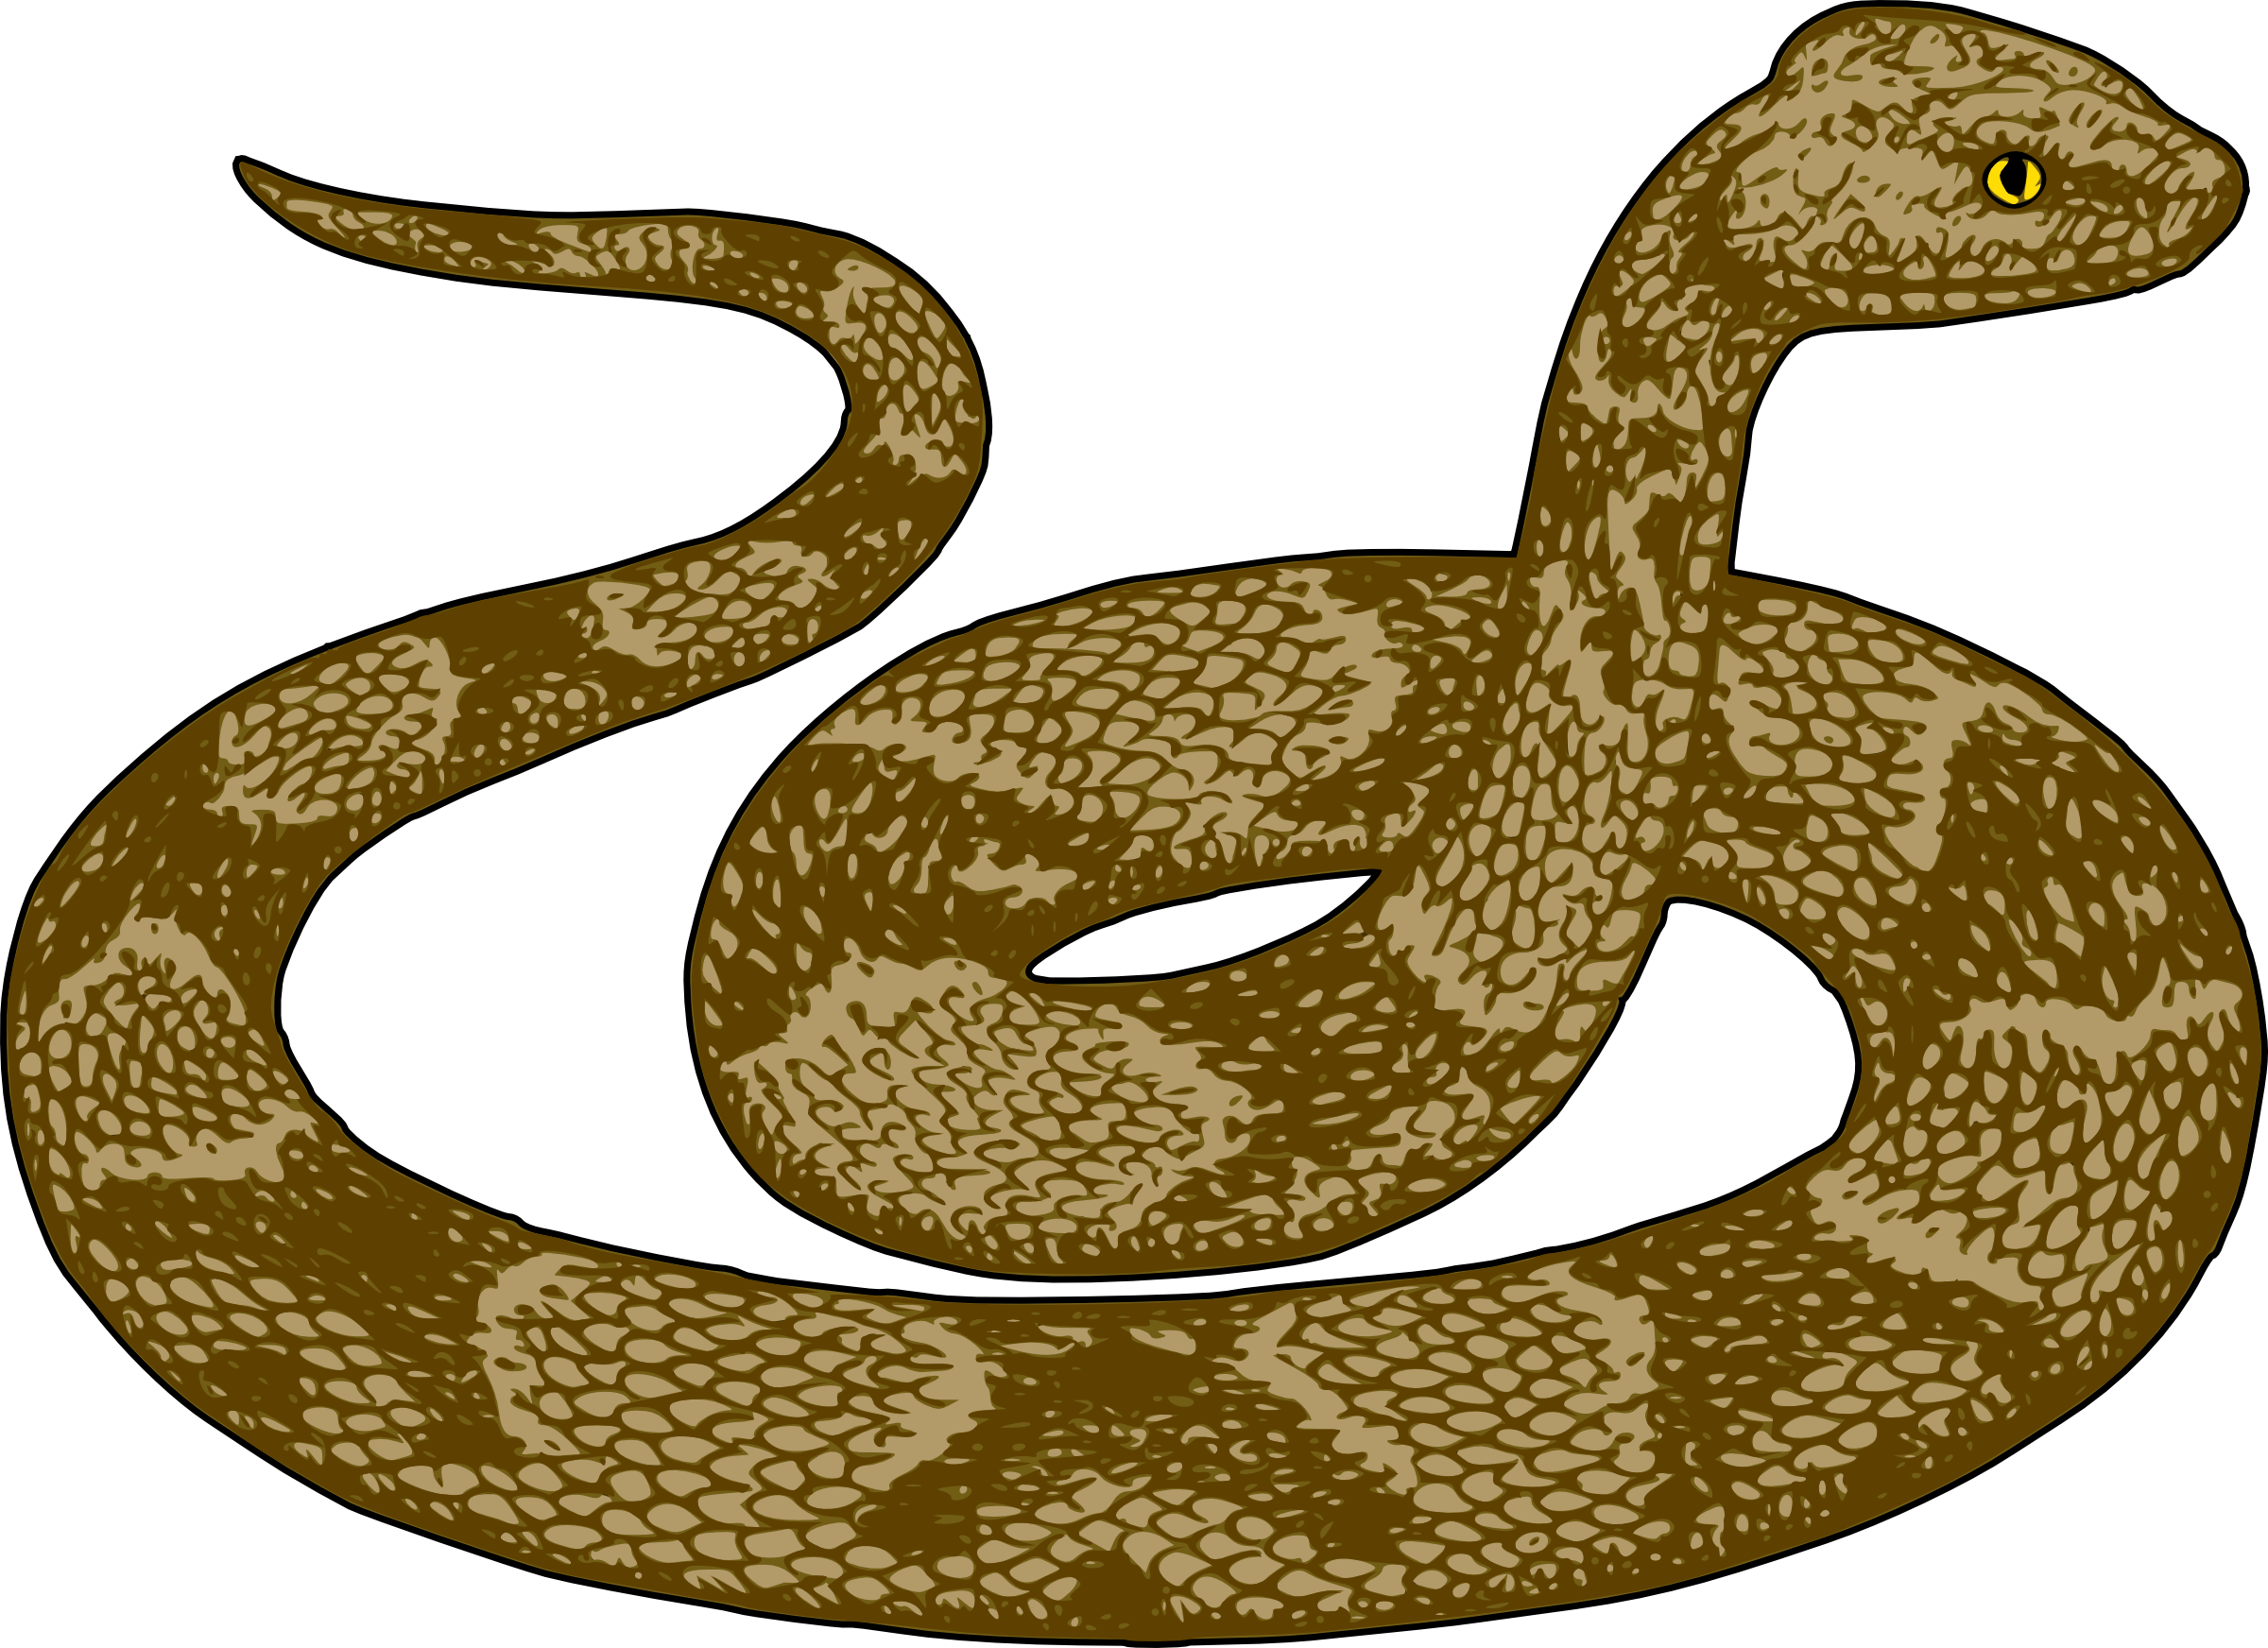 Snake clipart free clipart images 2 clipartix